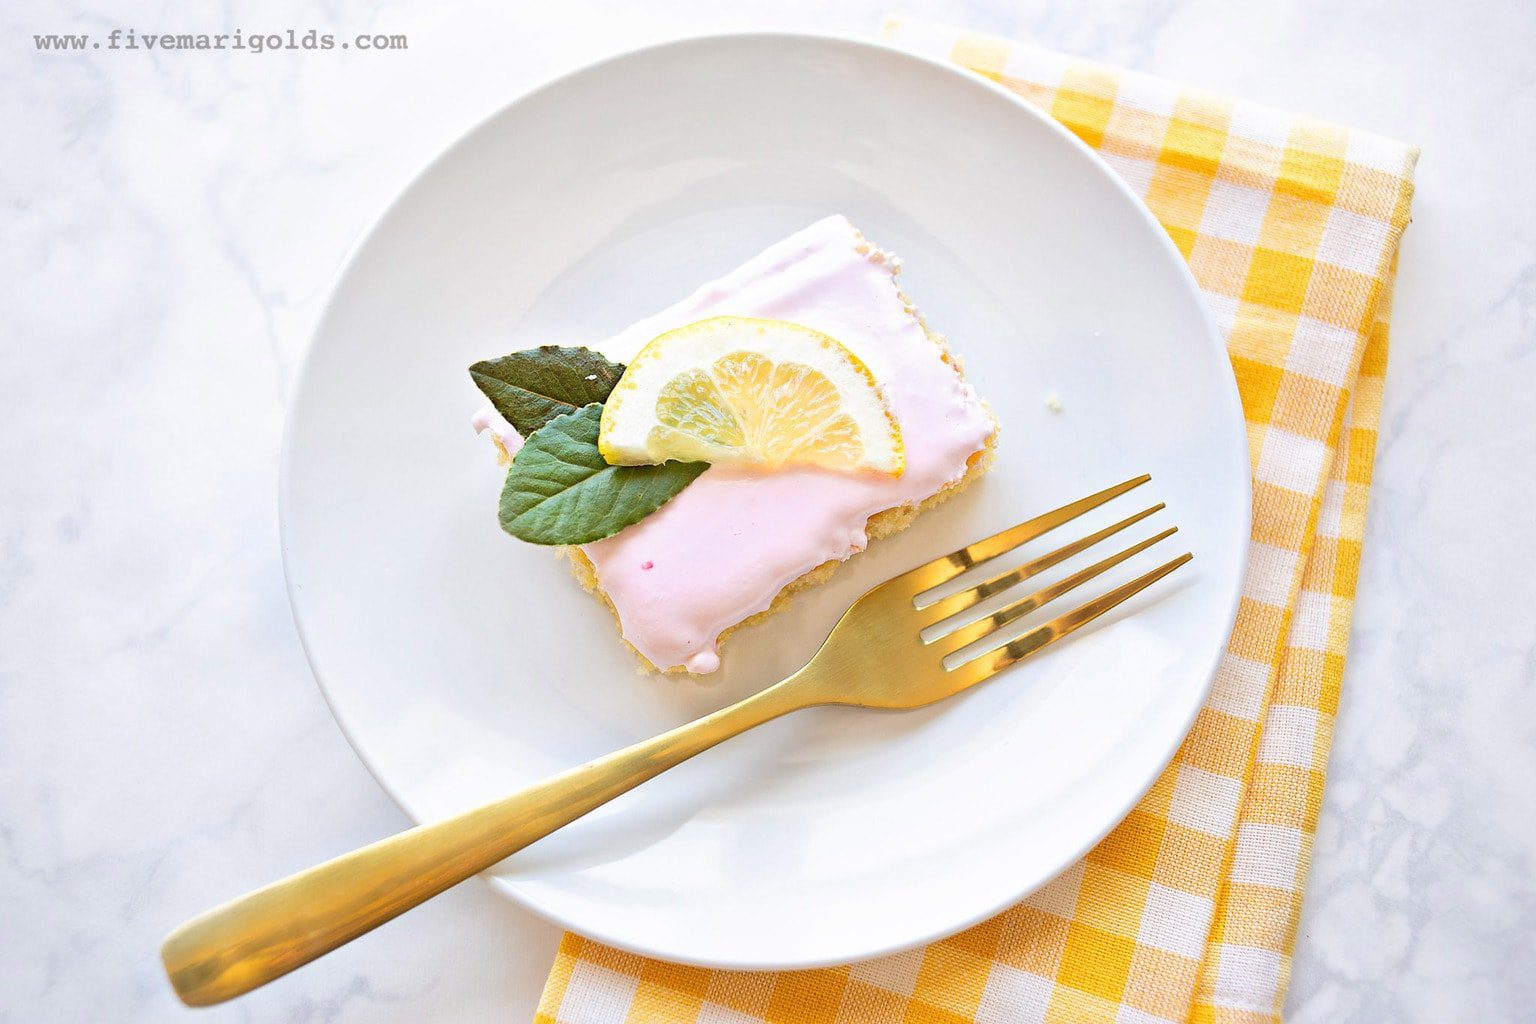 Sheet Cake with pink frosting and lemon slices on a white plate